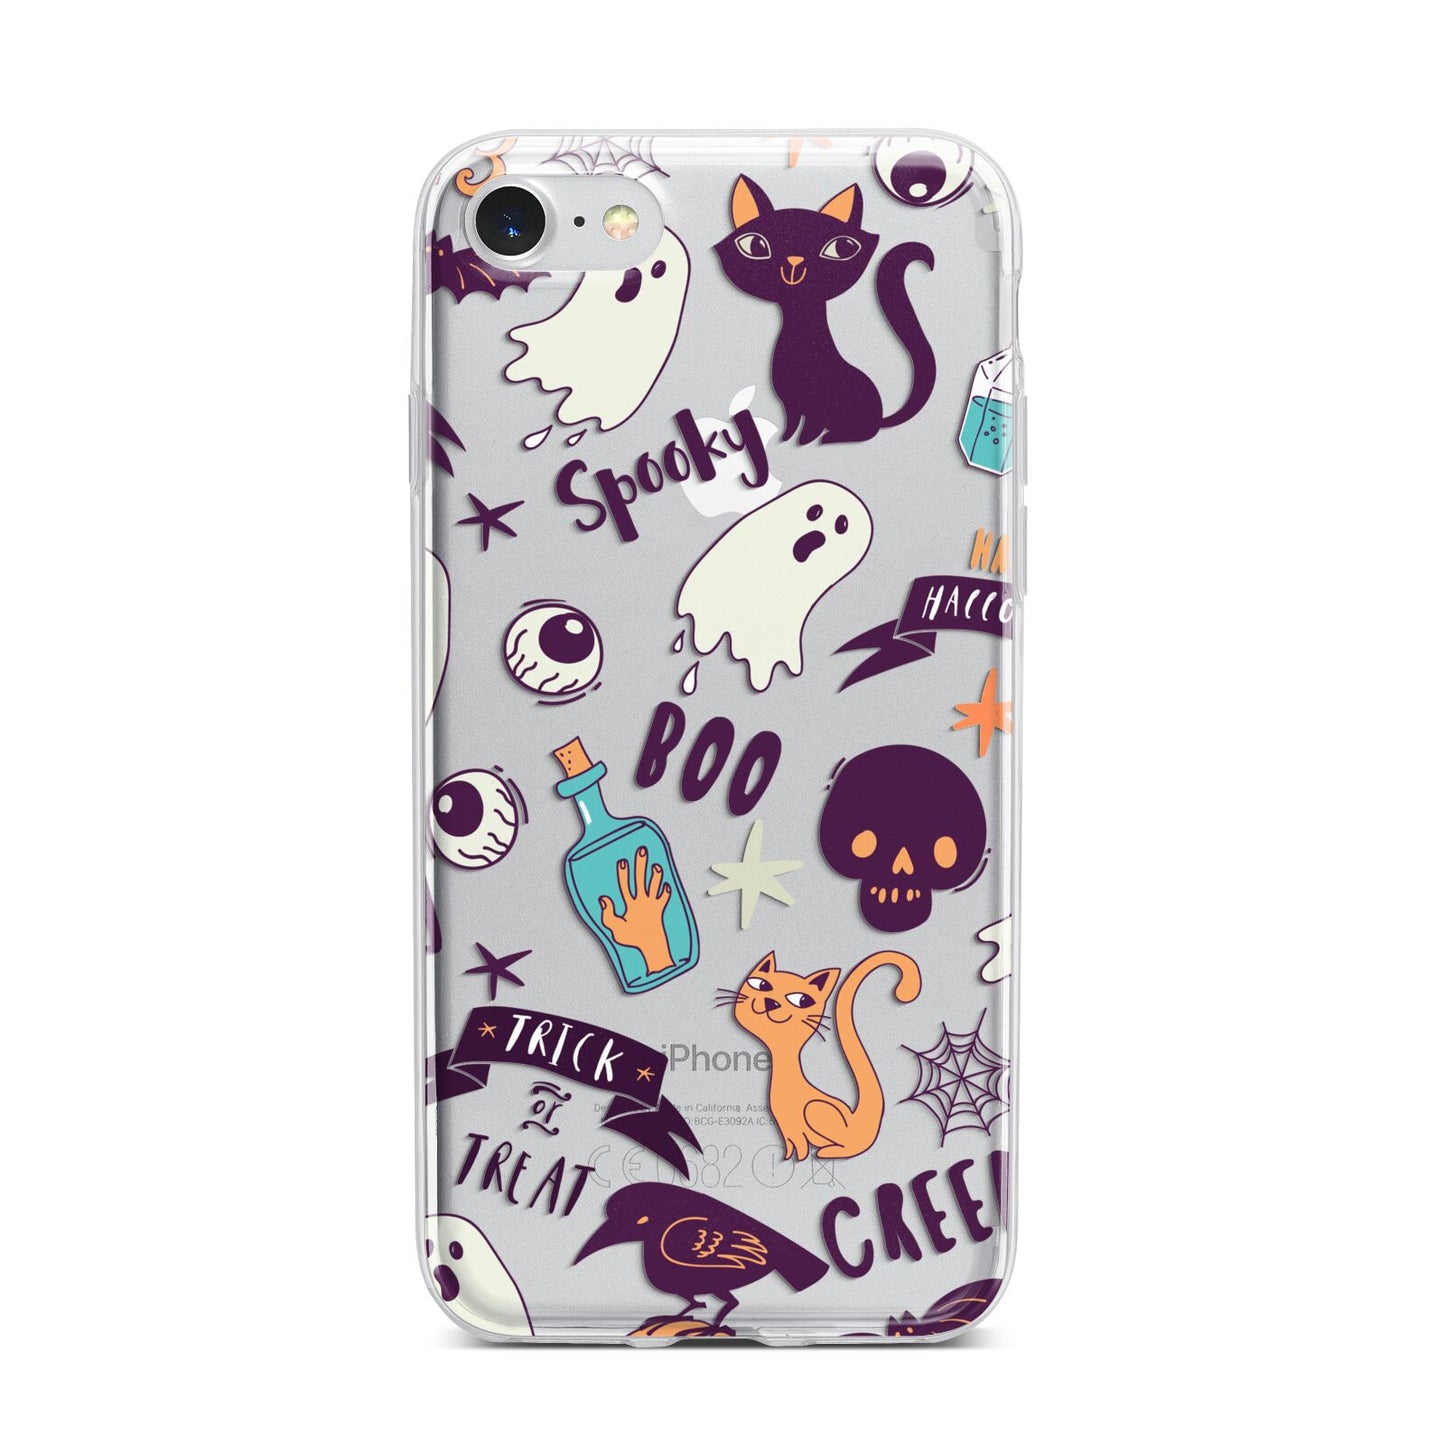 Wacky Purple and Orange Halloween Images iPhone 7 Bumper Case on Silver iPhone